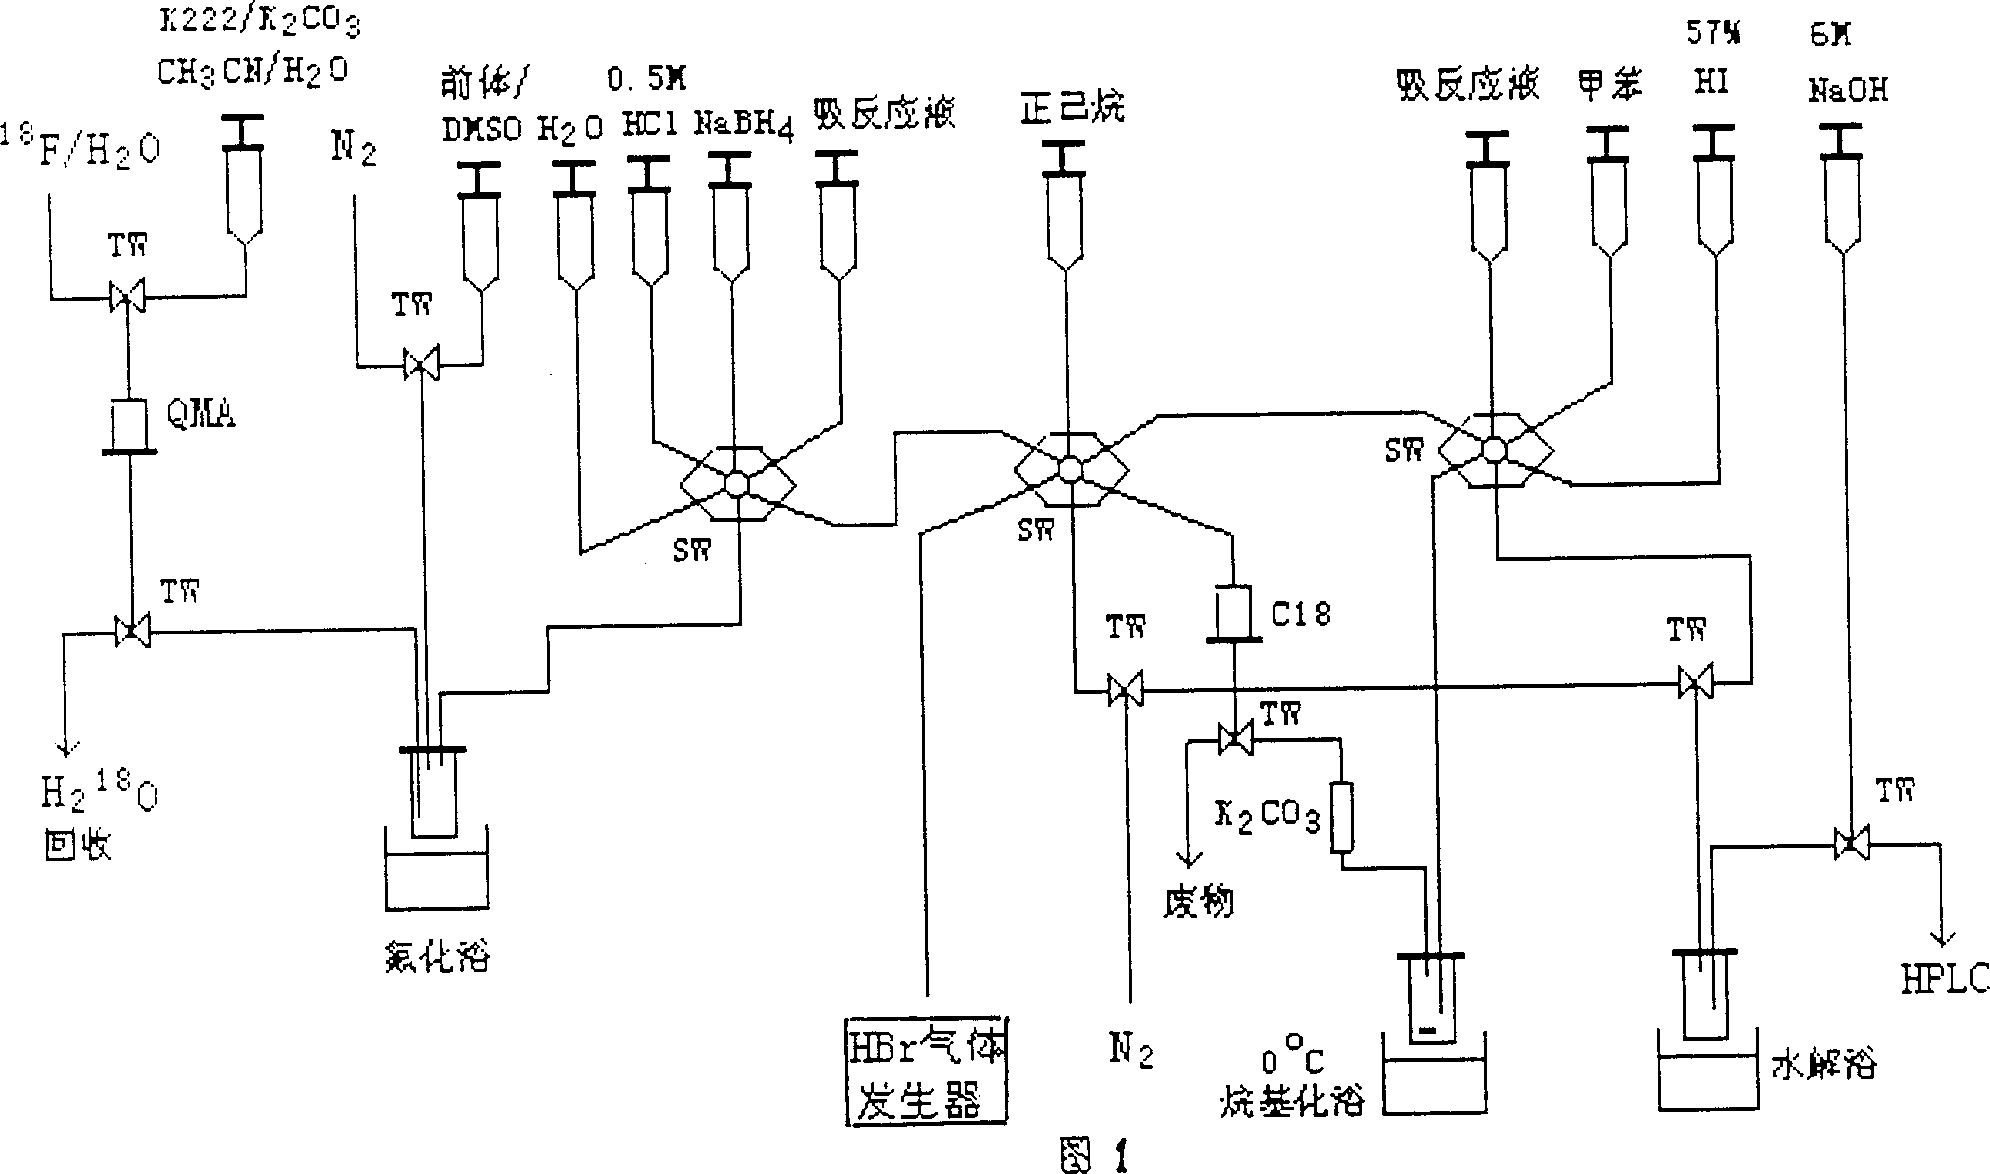 Process for synthesizing 6-18F-L-dopa